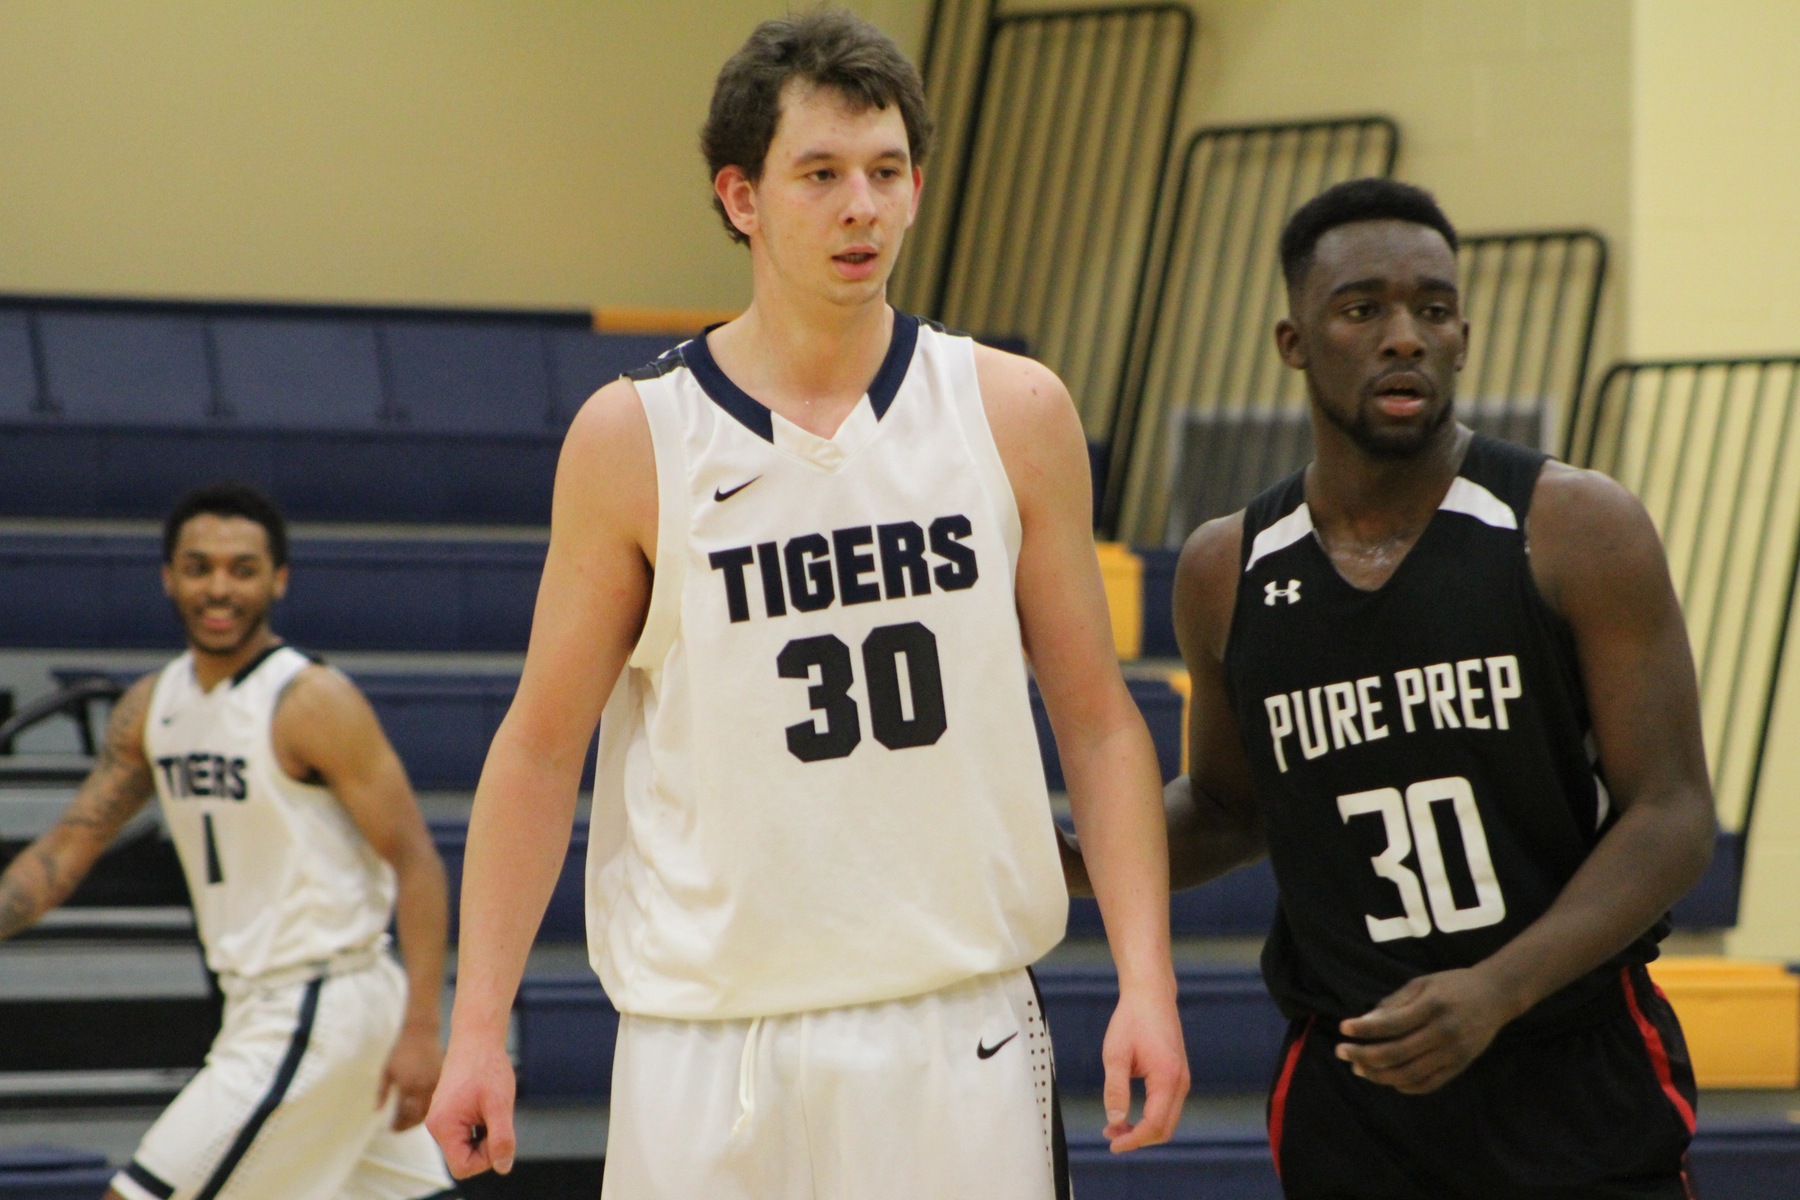 Jonas Perkis pulled down 21 rebounds as the MCC varsity reserve team topped Pure Prep 77-54 at home on Sunday